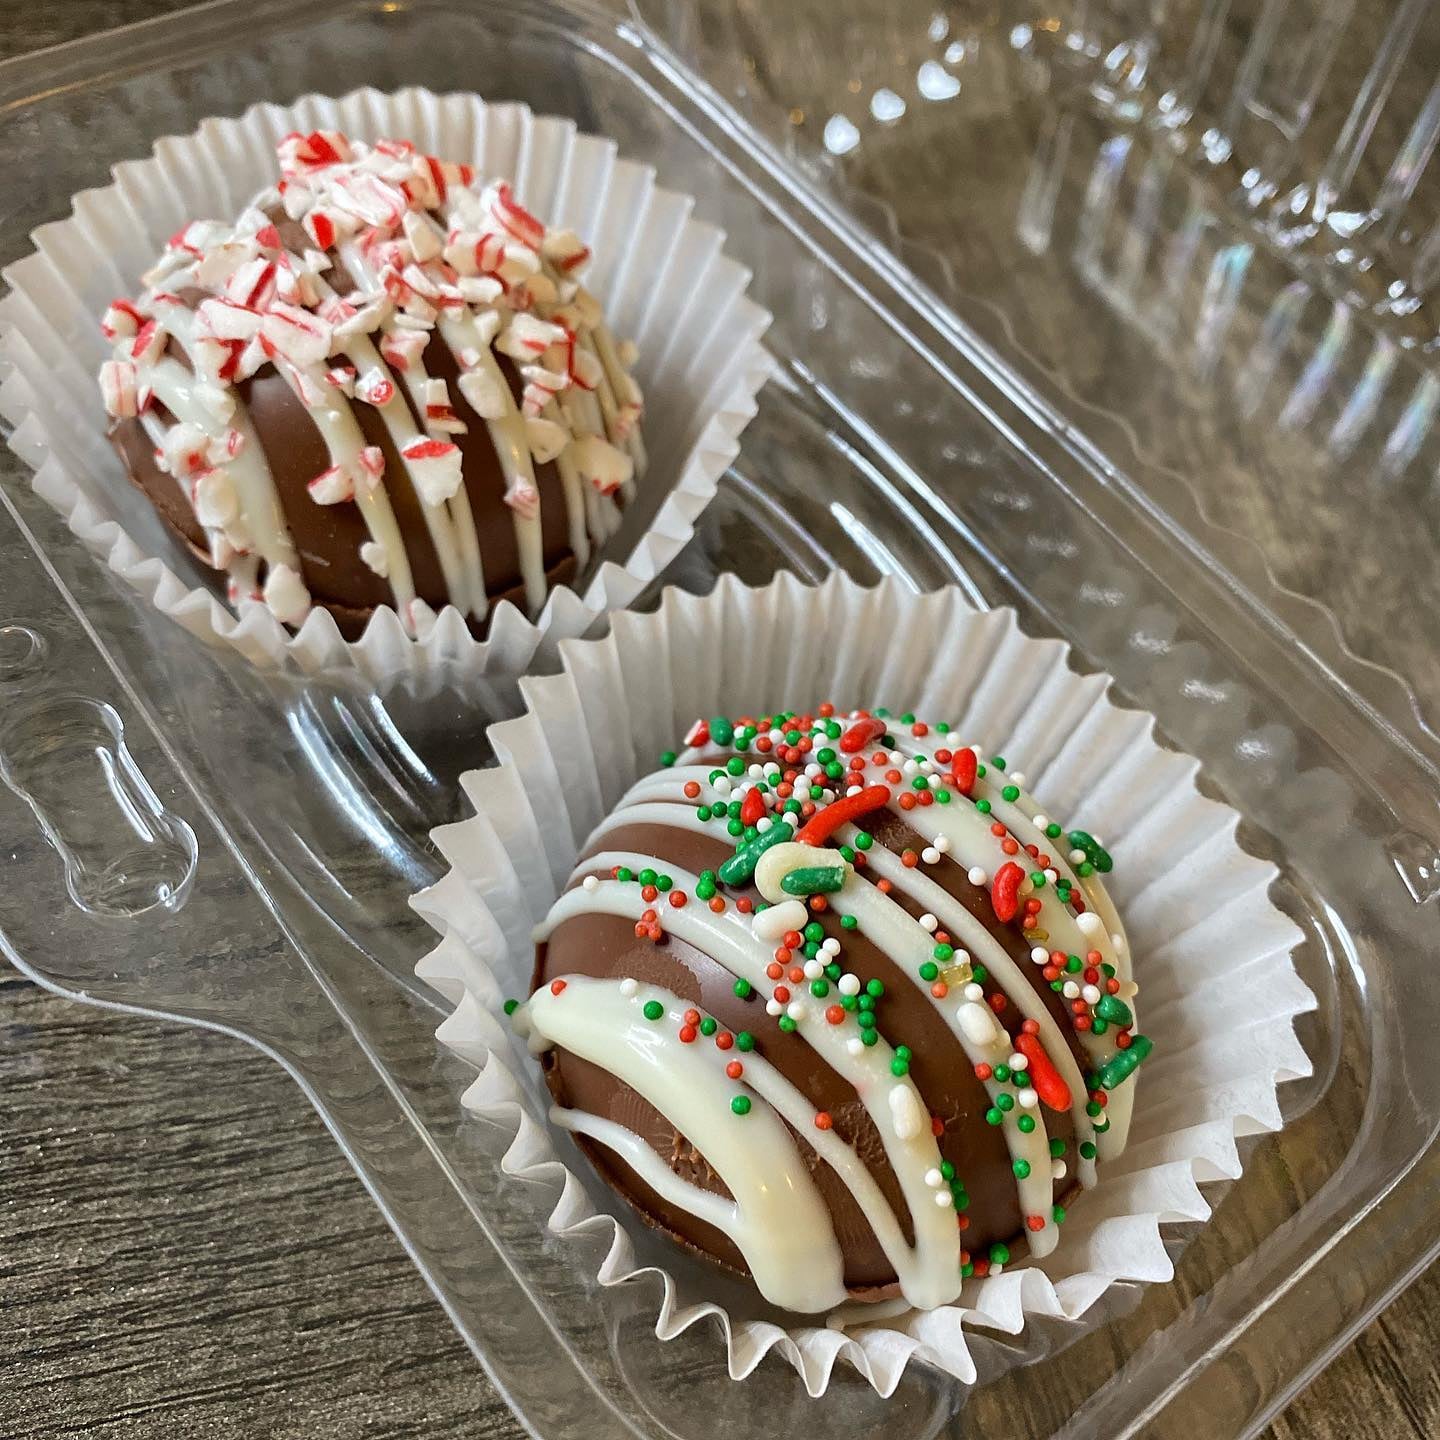 Tweety’s Sweeties Hot Chocolate bombs made in Indianapolis